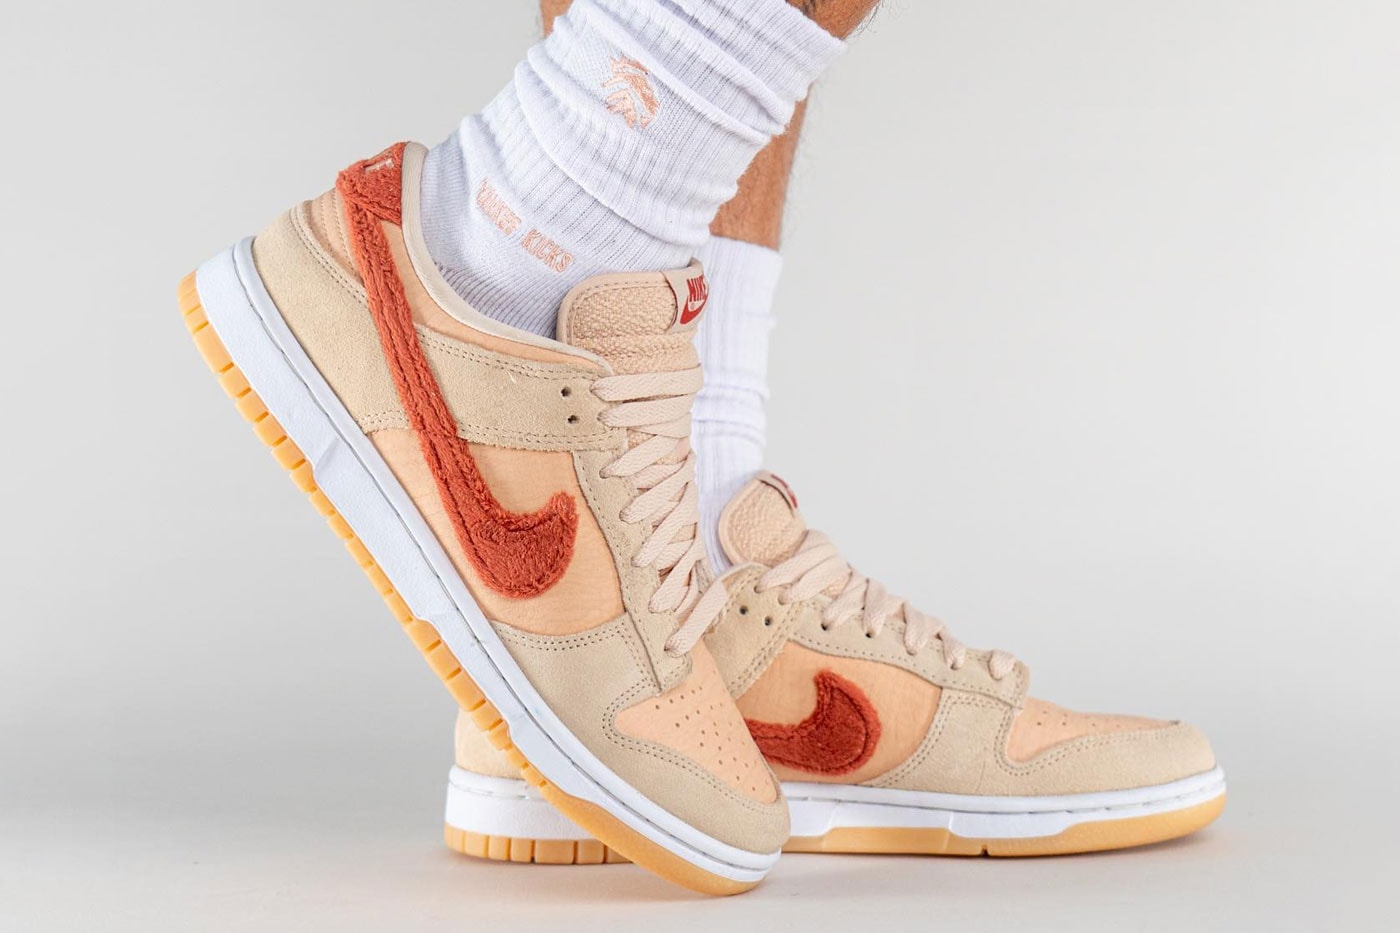 On-Feet Look at Nike Dunk Low "Carpet Swoosh" low top skate shoes swoosh textured fuzzy